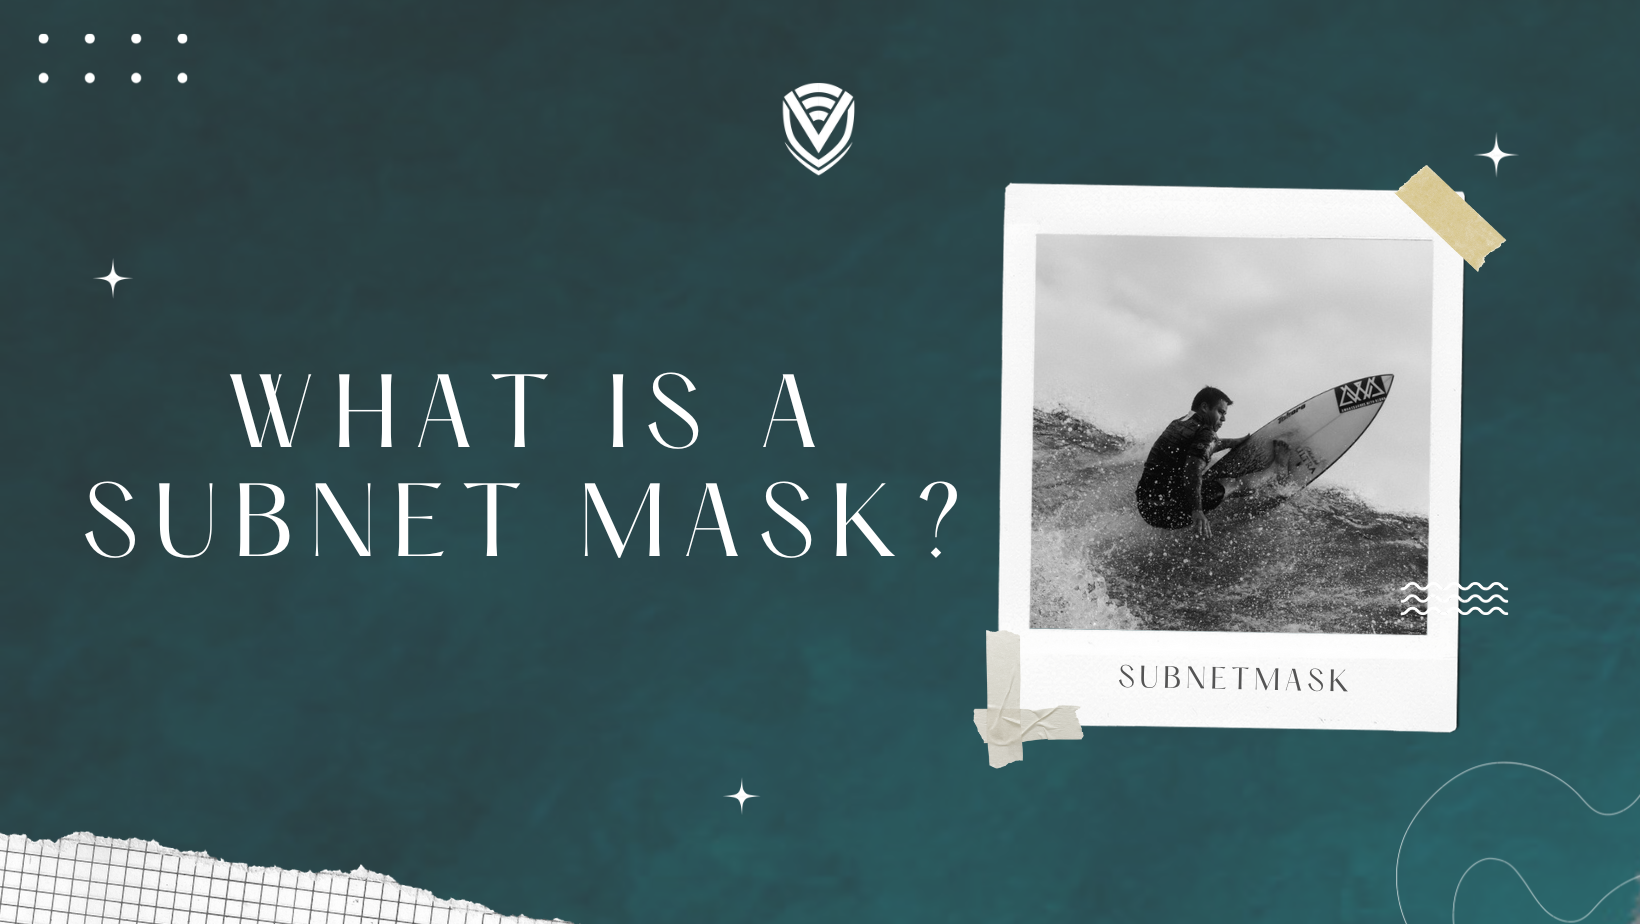 What is a Subnet Mask?